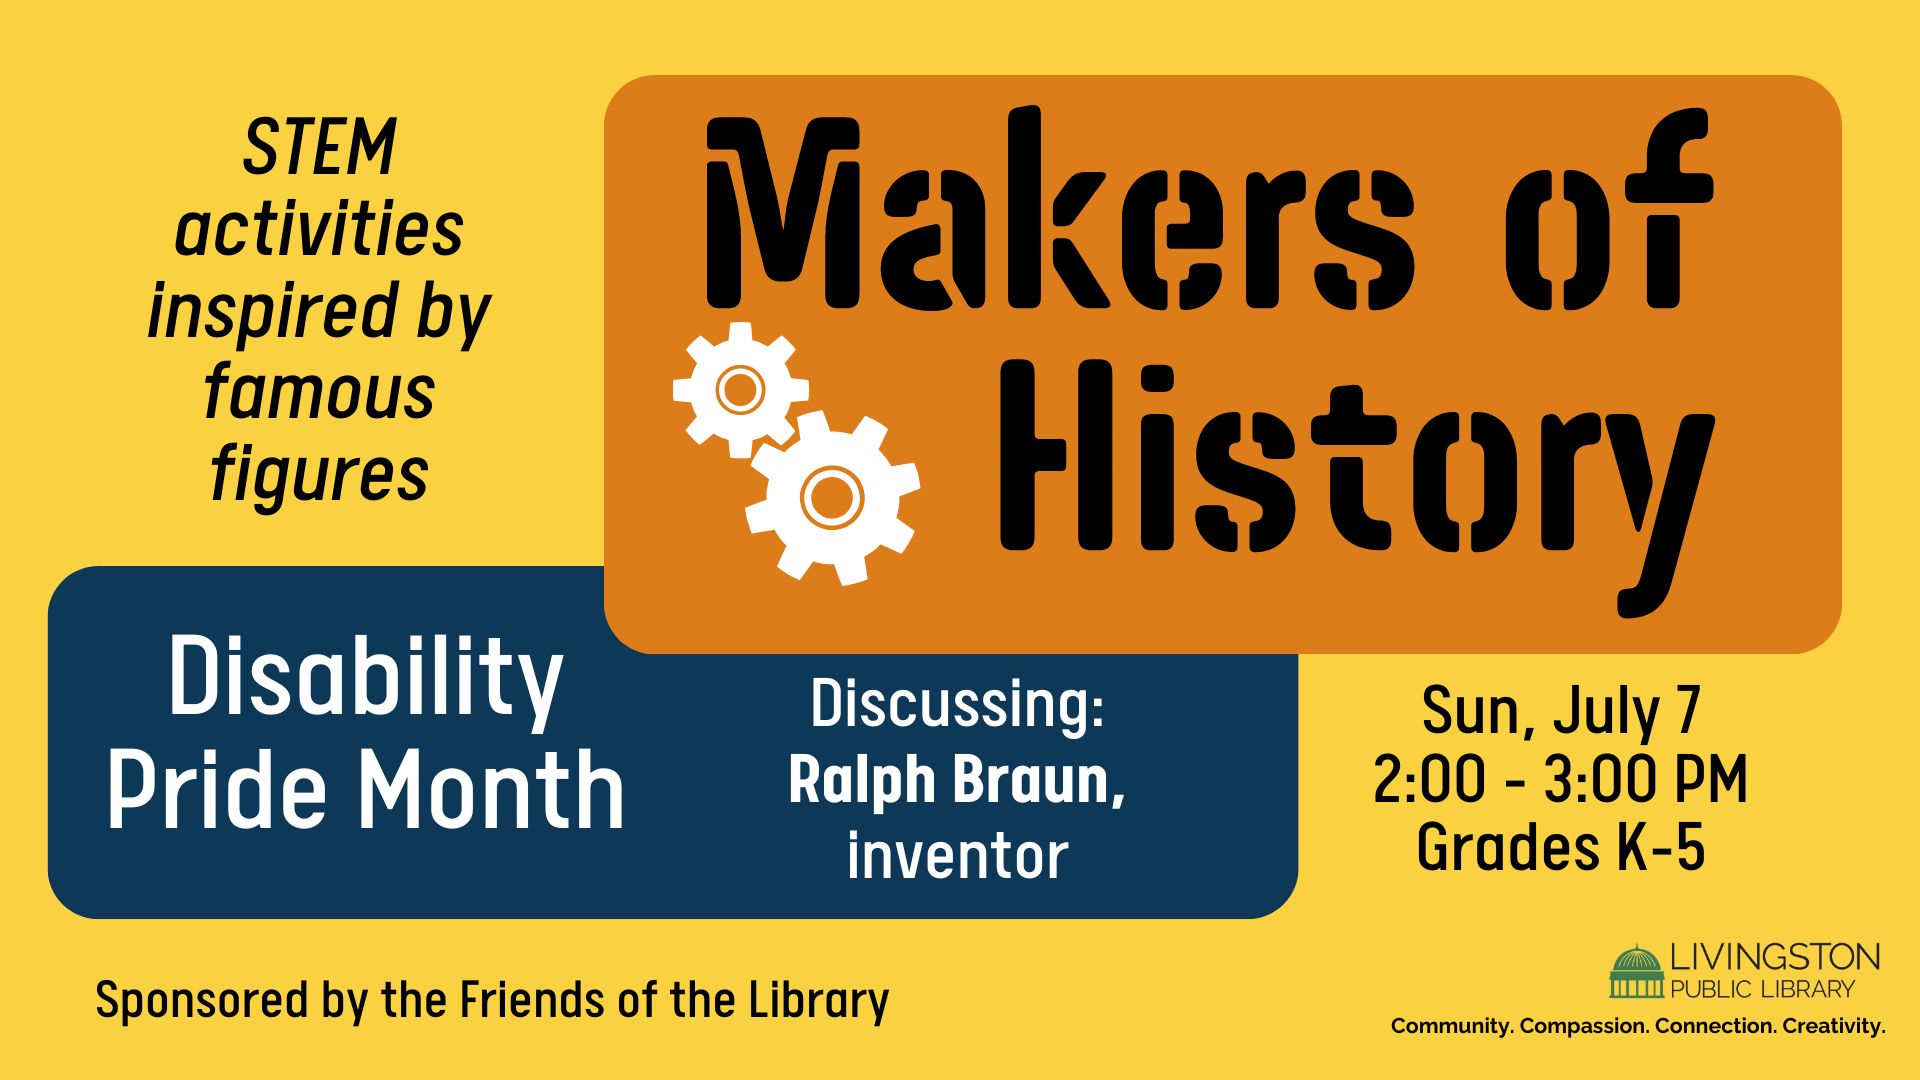 Makers of History: STEM activities inspired by famous figures. Disability Pride Month. Discussing: Ralph Braun, inventor. Sun, July 7. 2:00 - 3:00 PM. Grades K-5. 